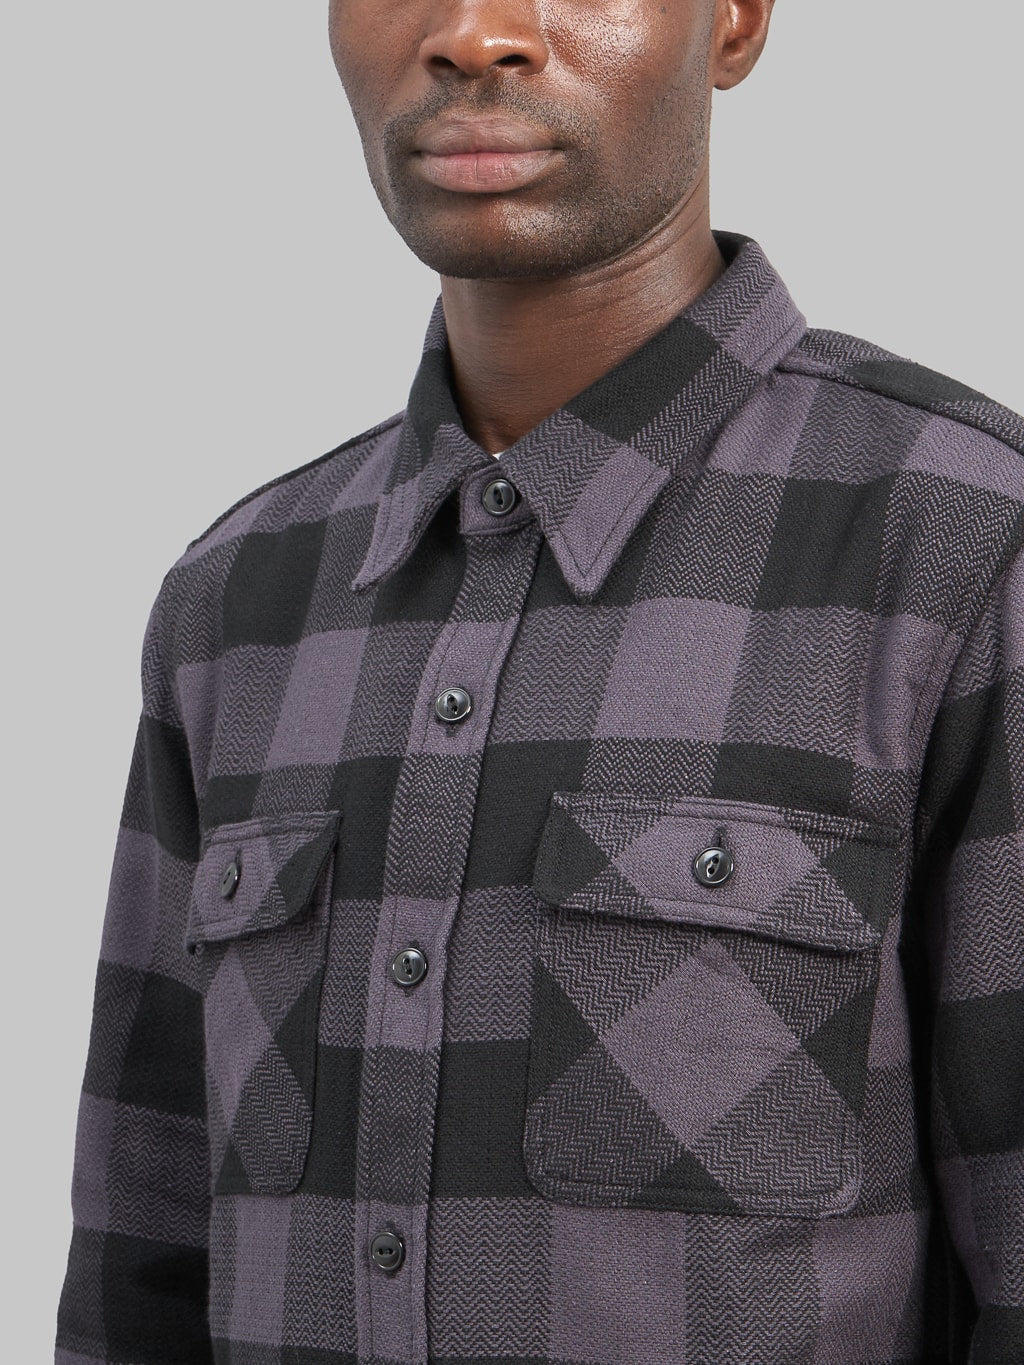 The Flat Head Block Check Flannel Shirt Grey chest pockets